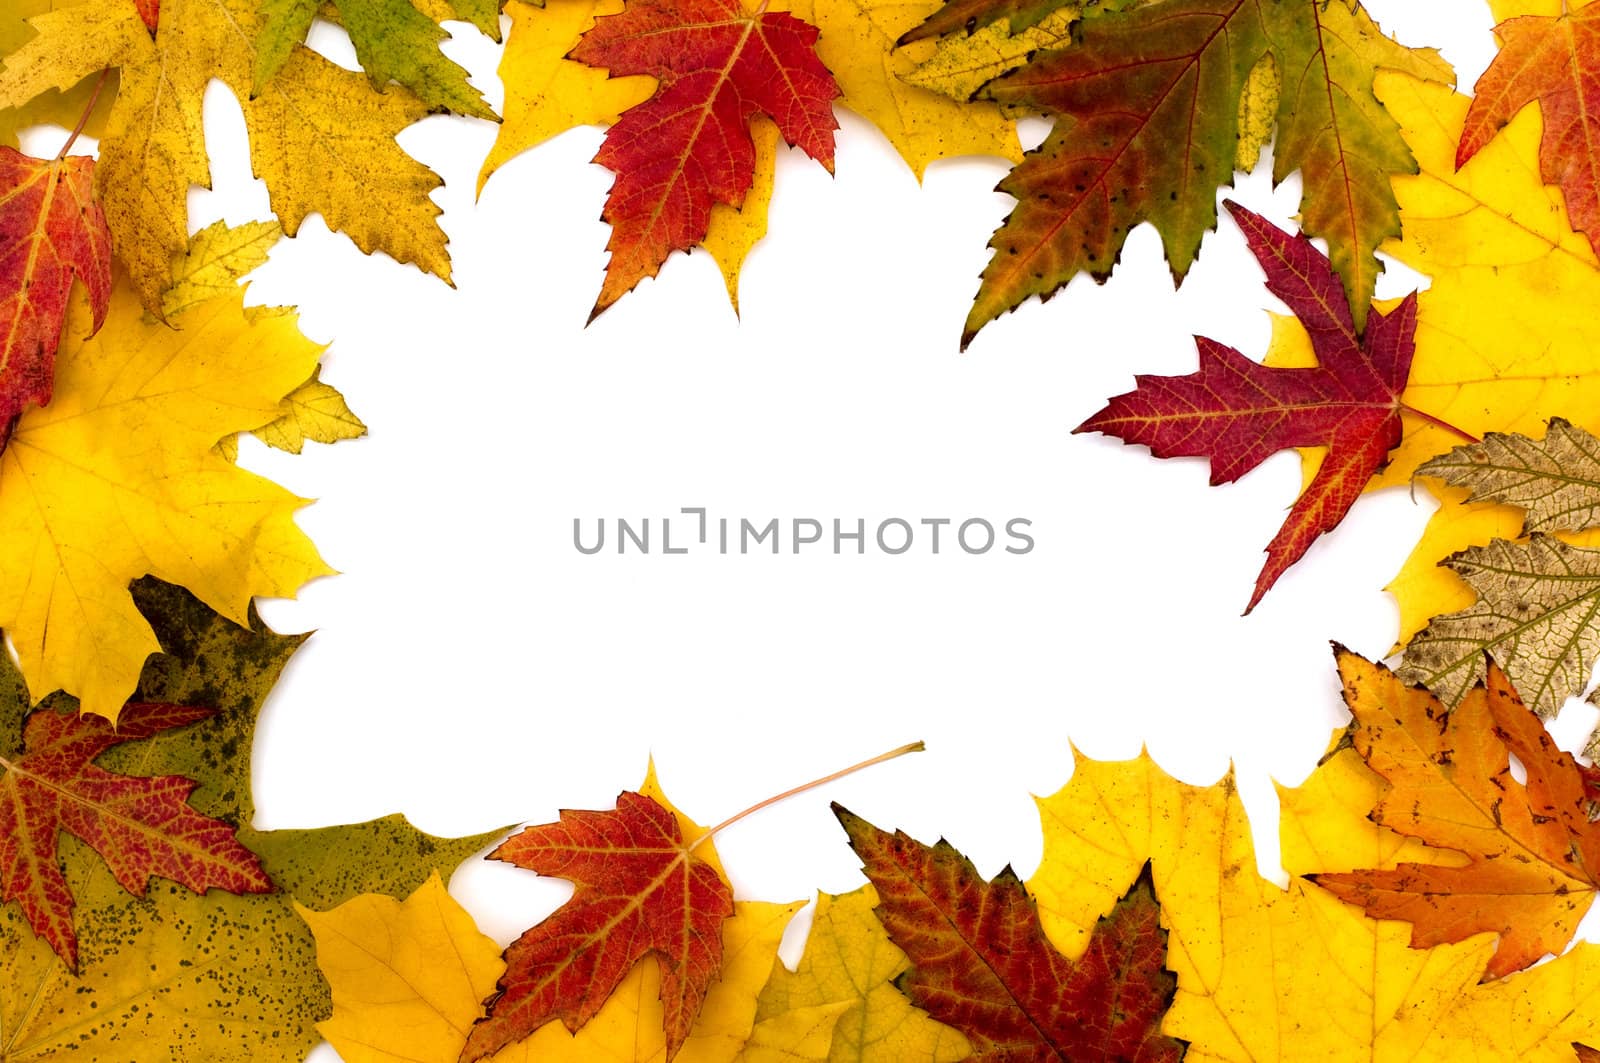 The frame of autumn leaves by DNKSTUDIO